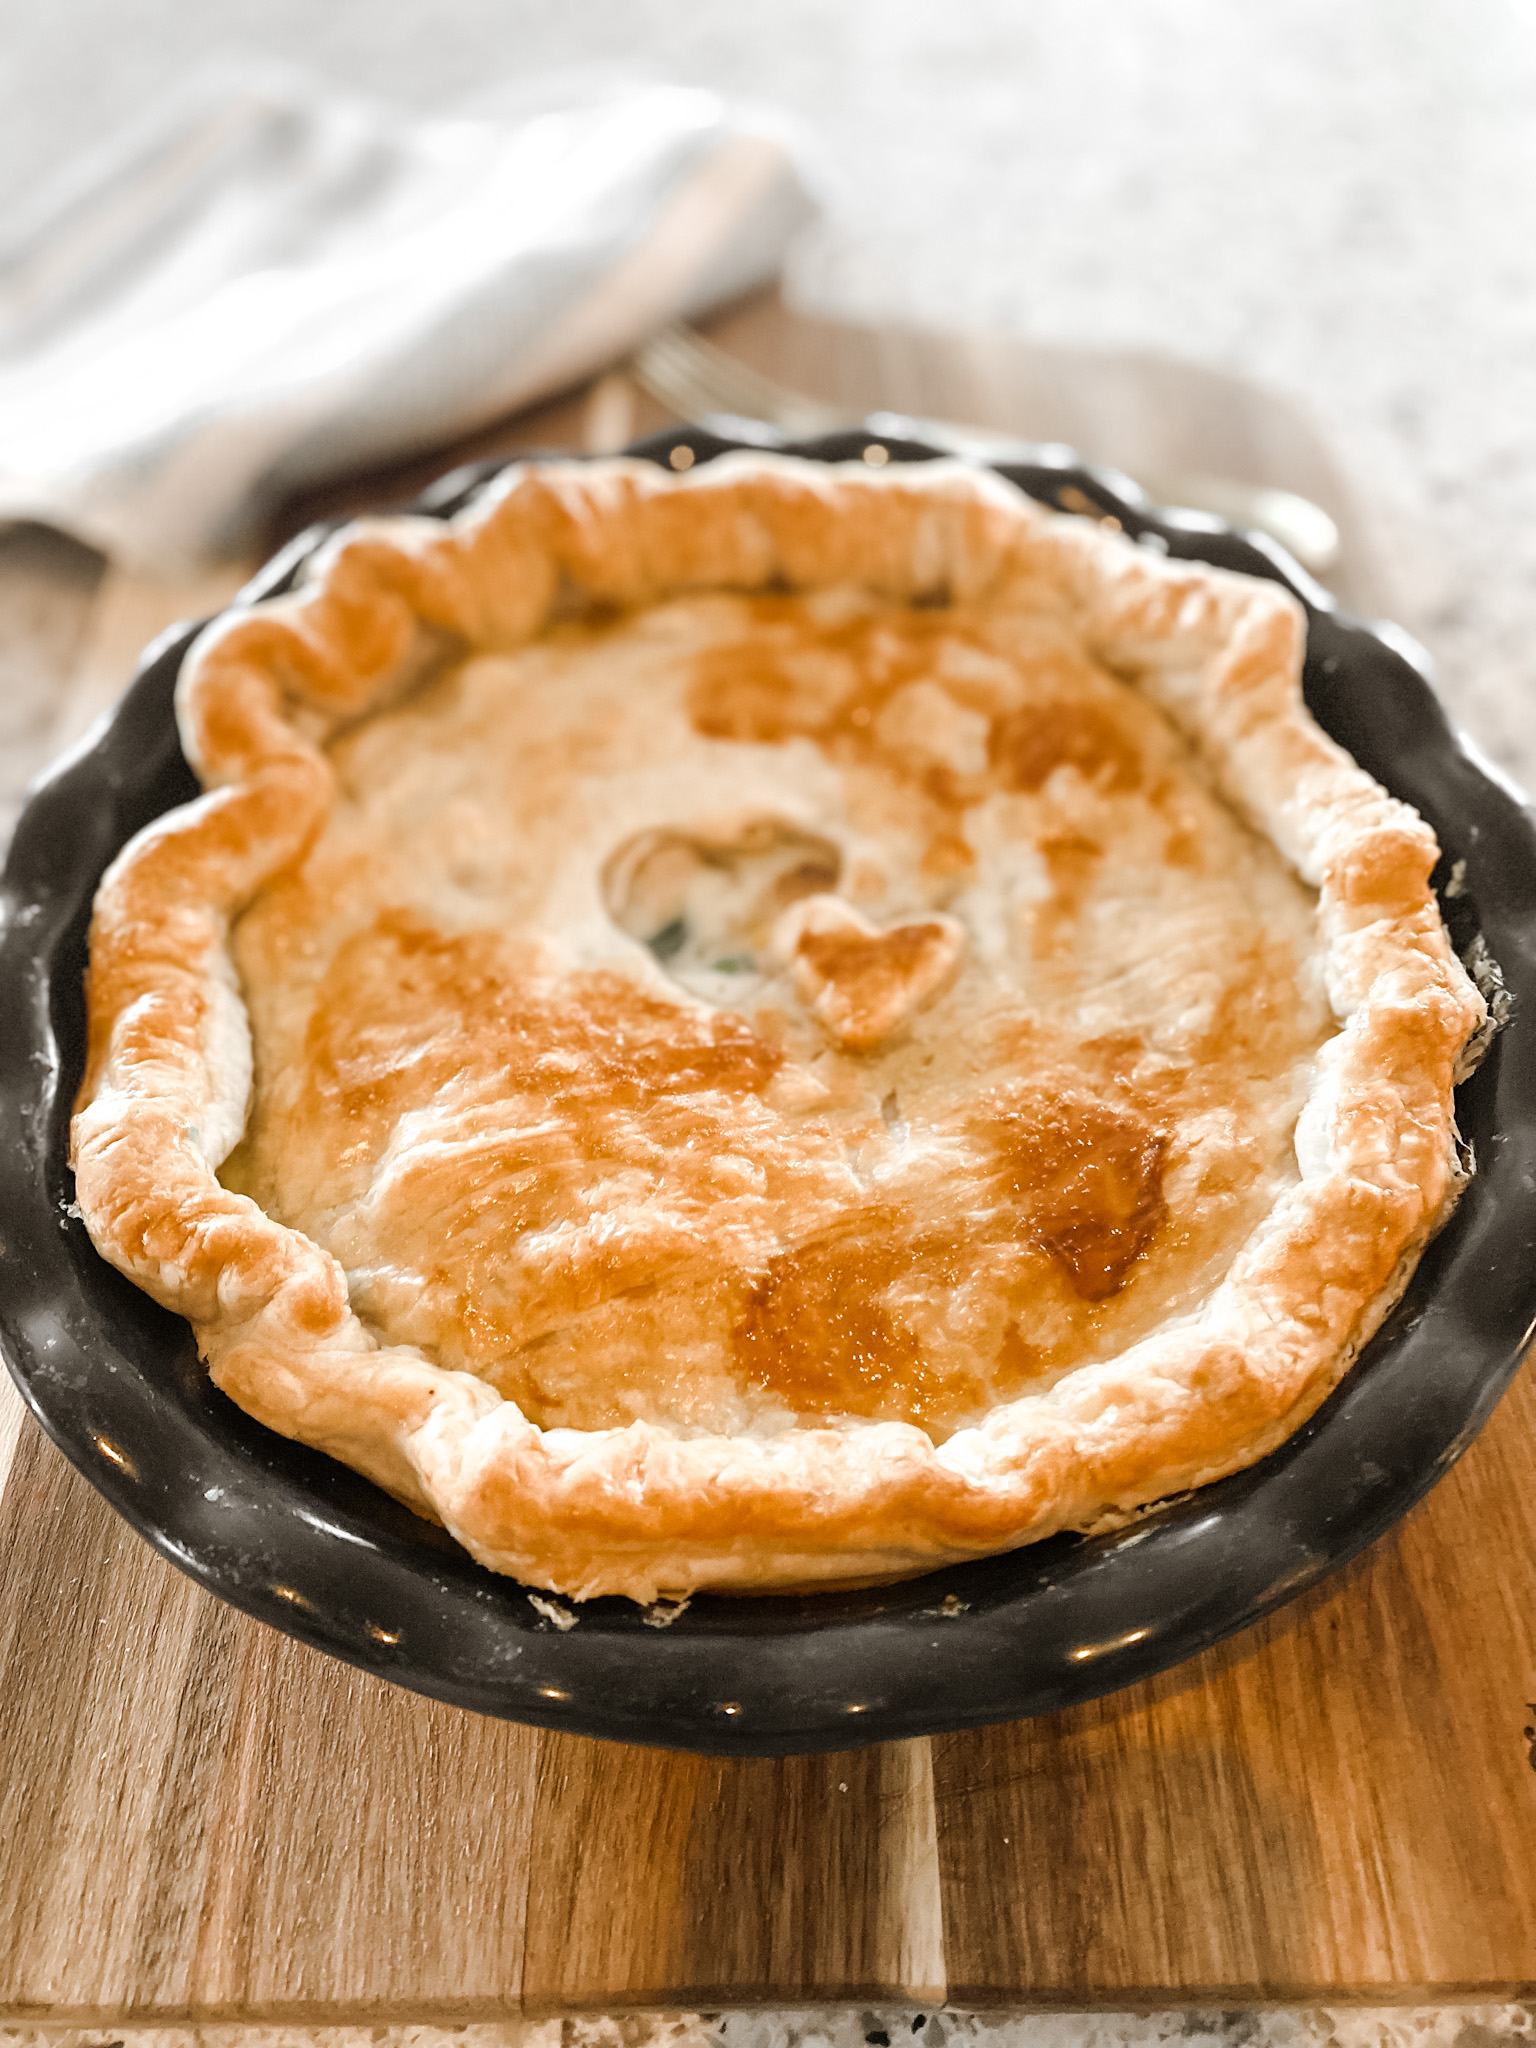 baked chicken pot pie in a round blue baking dish on a wood cutting board